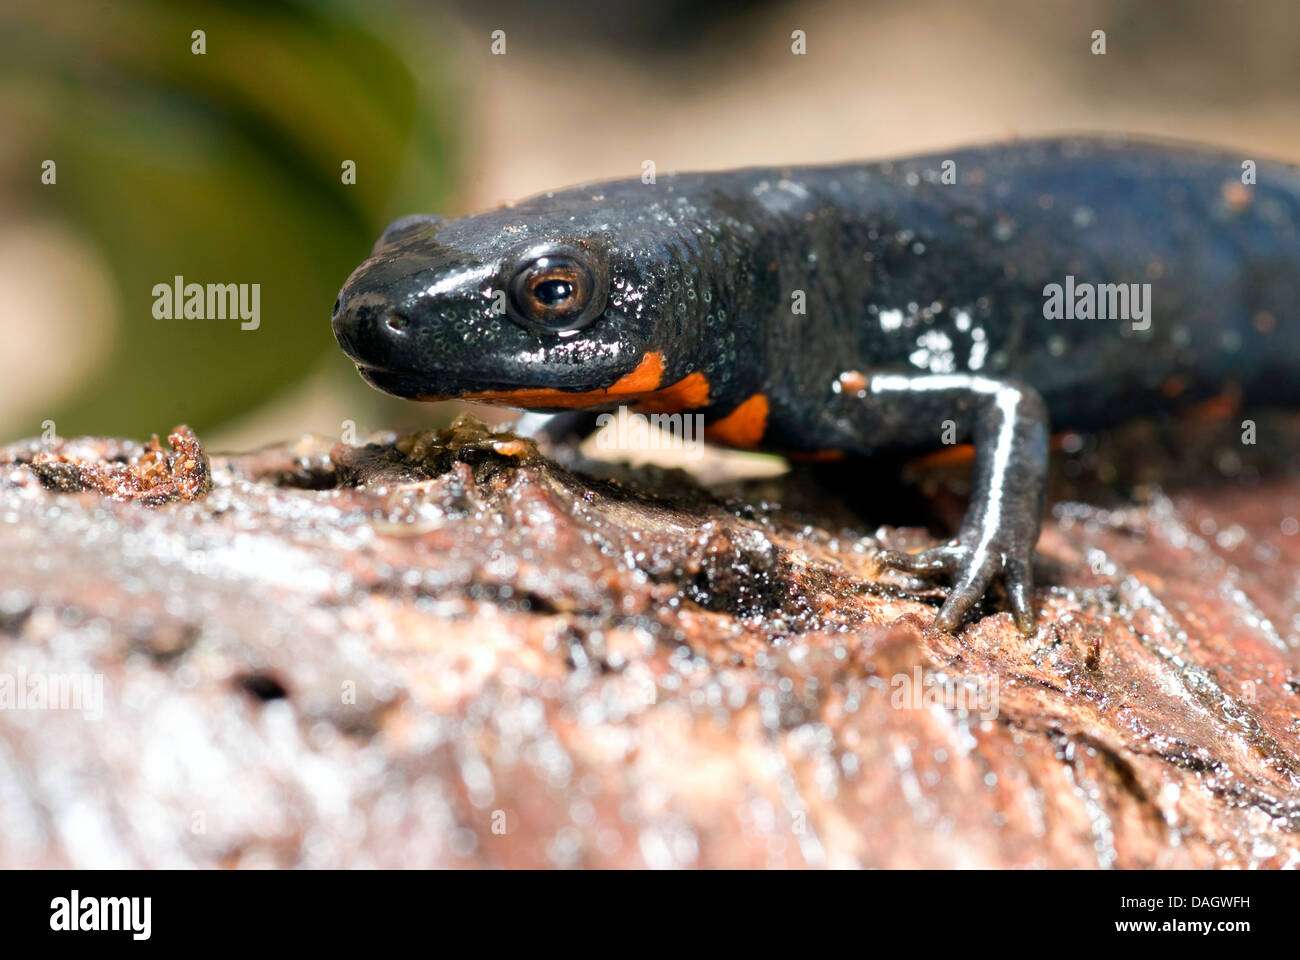 Chinese dwarf newt, Chinese fire bellied newt (Cynops orientalis), portrait Stock Photo